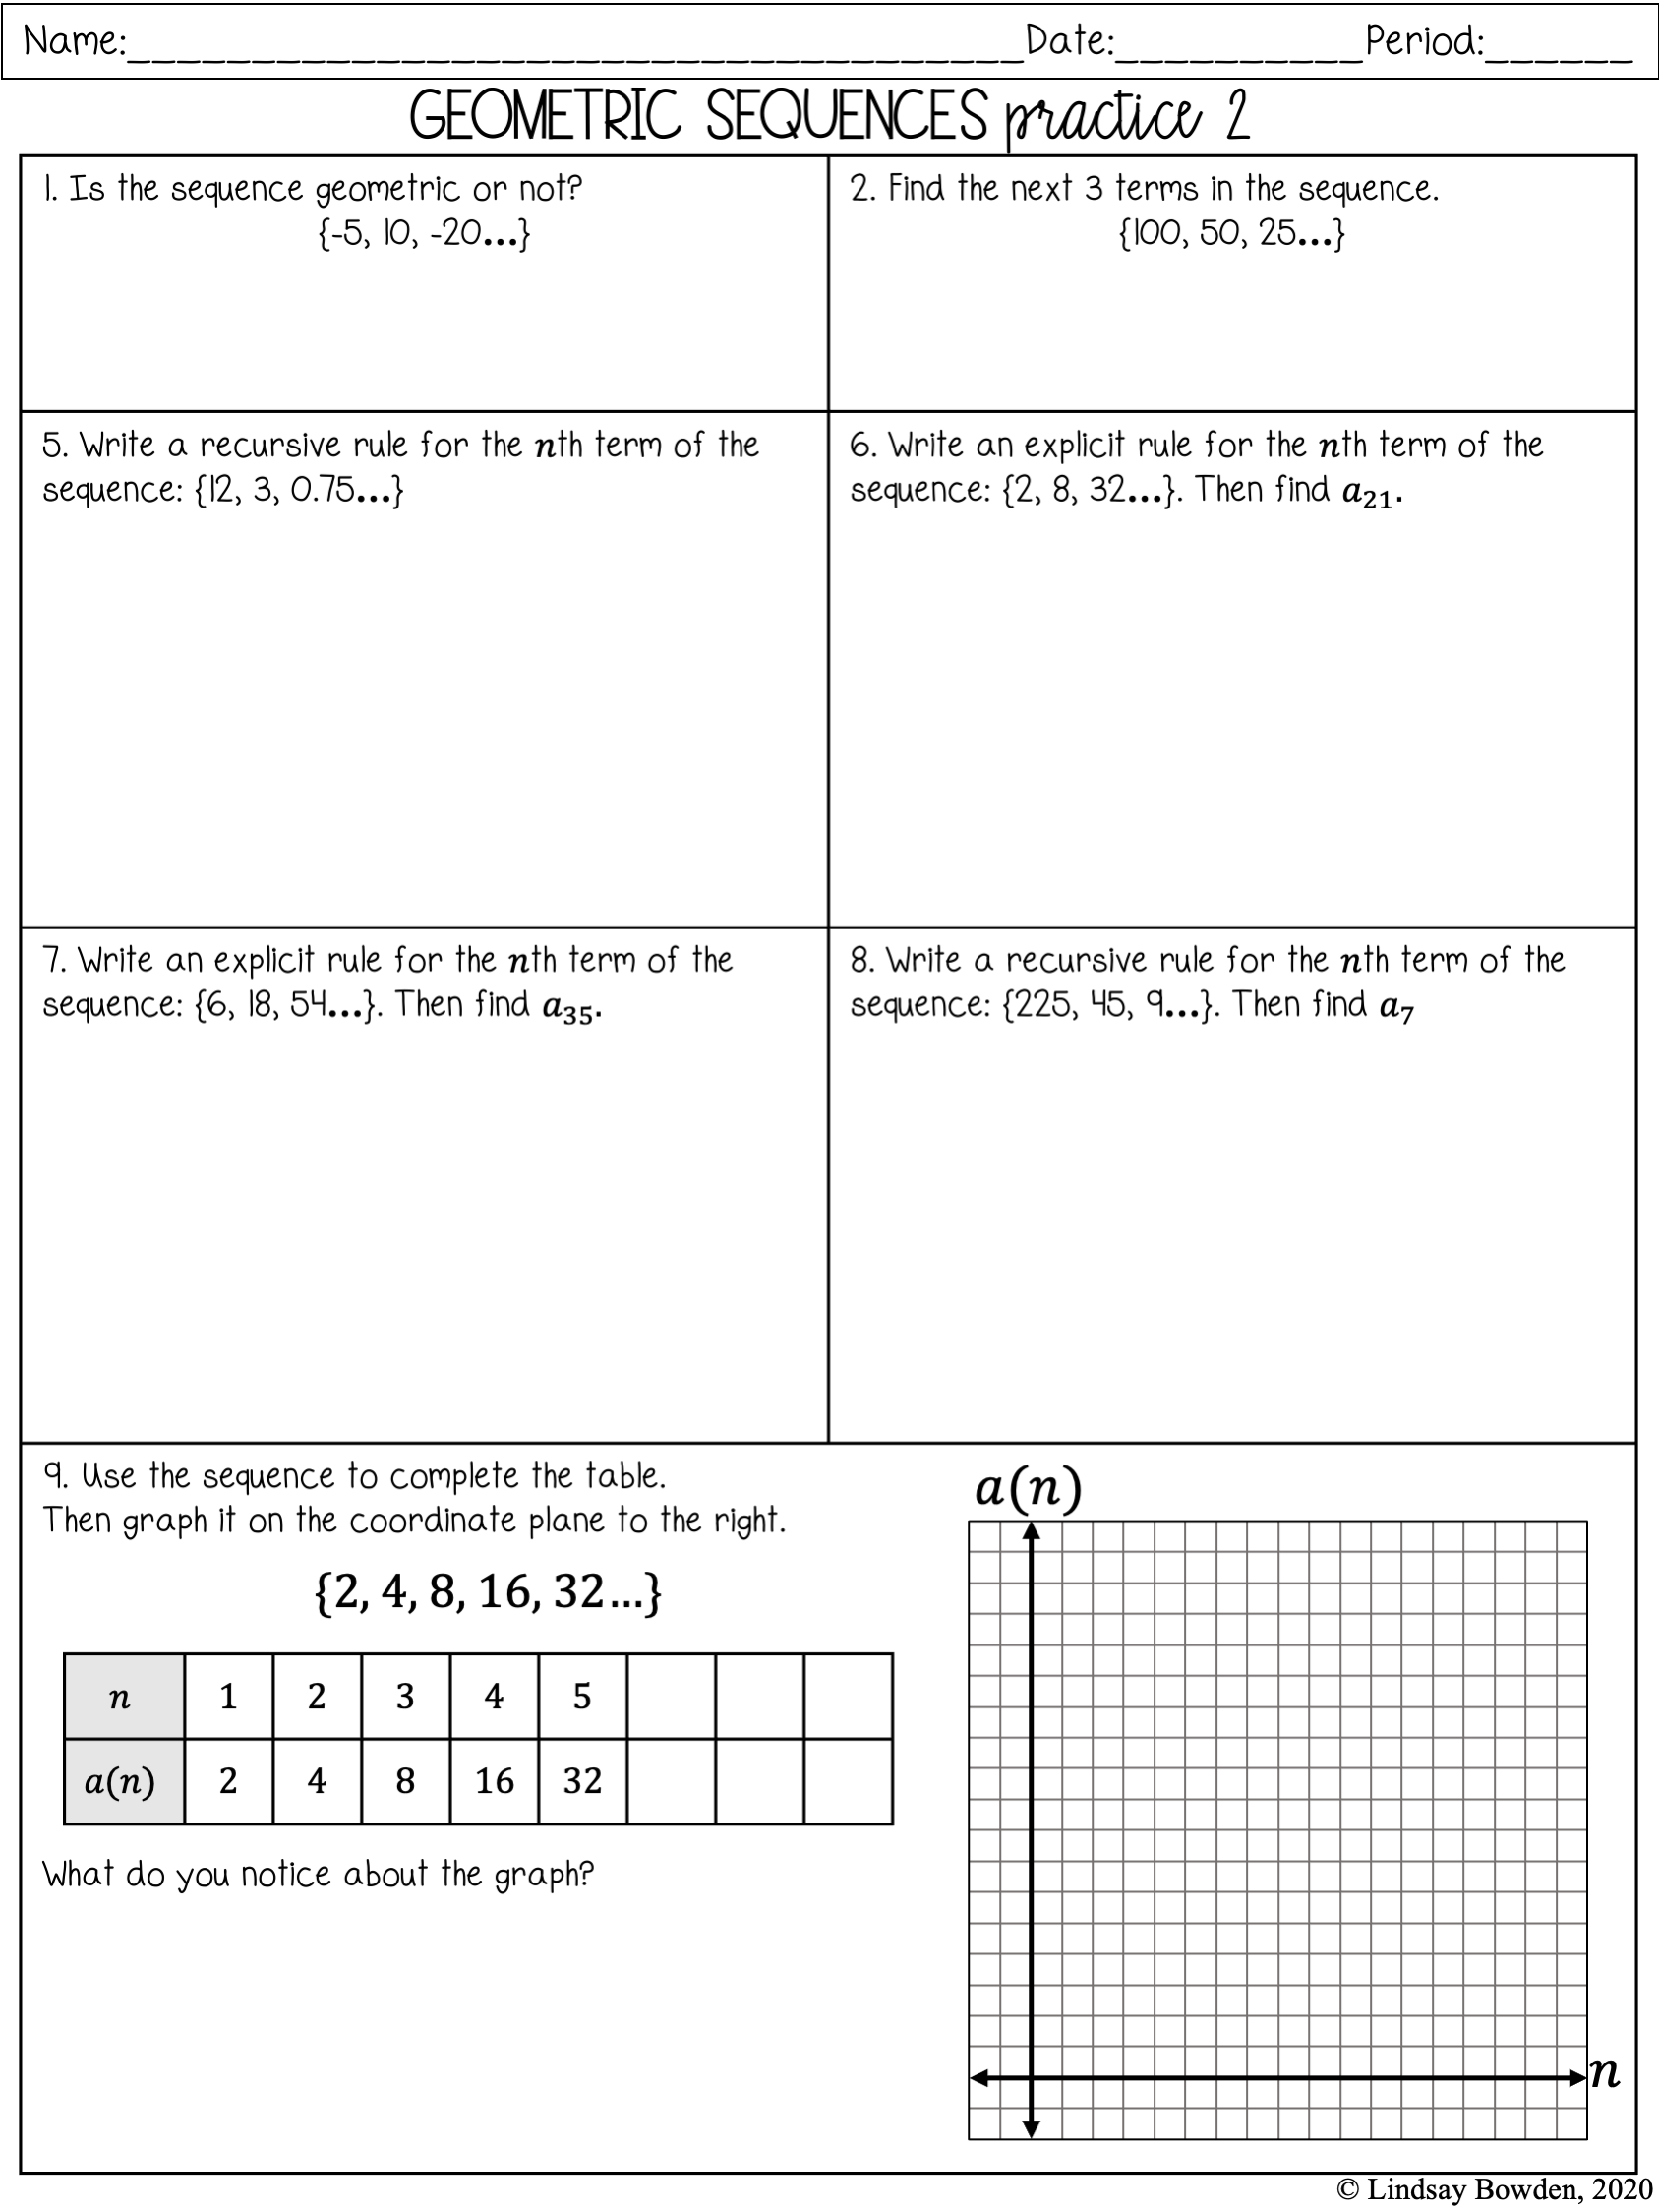 Geometric Sequences Notes and Worksheets - Lindsay Bowden Pertaining To Geometric Sequence Practice Worksheet